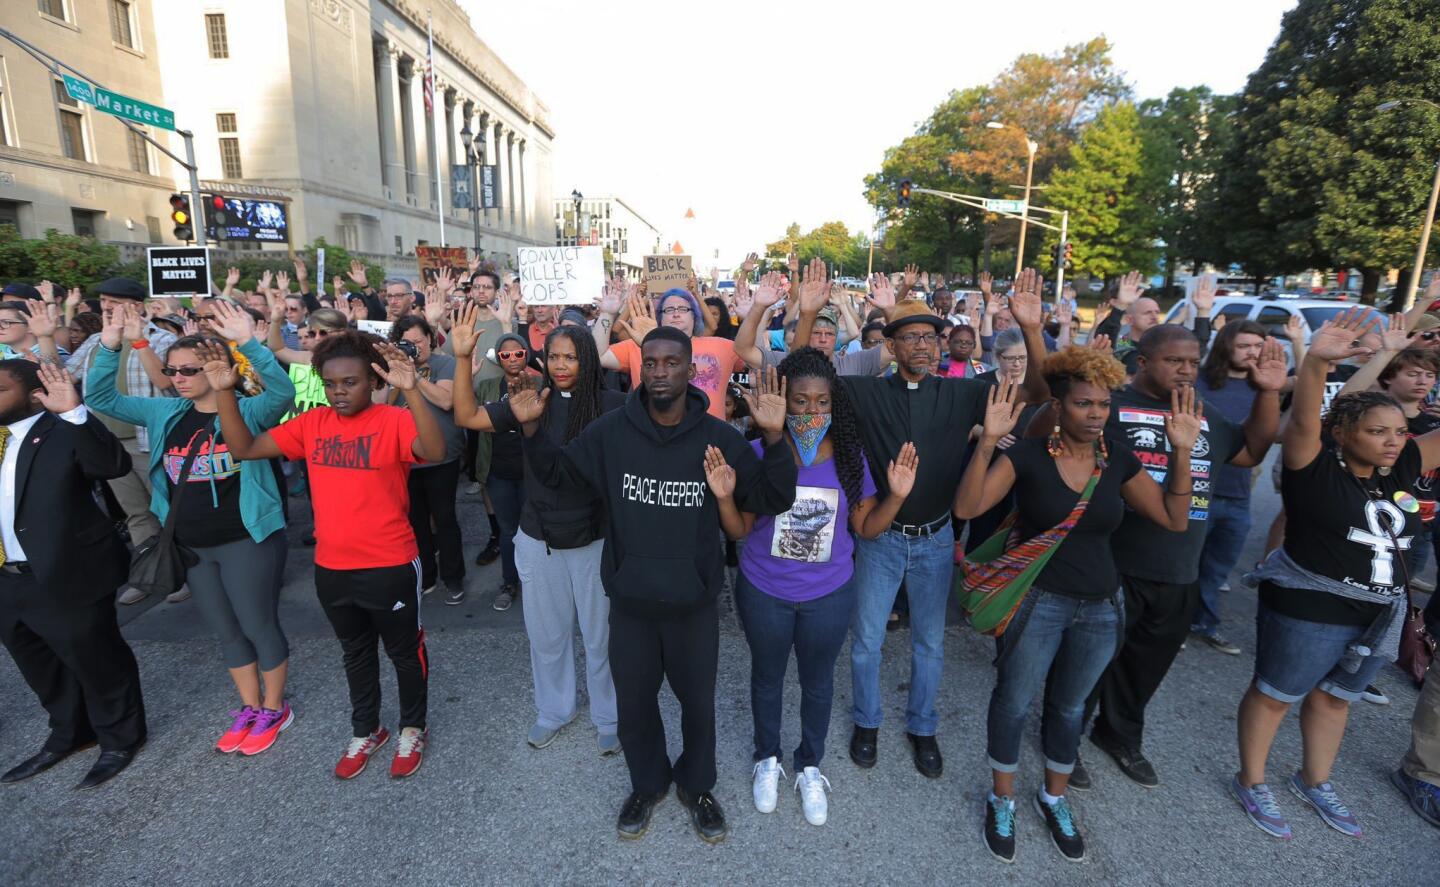 Protesters march in silence down Market Street in St. Louis on Sept. 18, 2017, in response to a not guilty verdict in the trial of former St. Louis police officer Jason Stockley. Stockley was acquitted on Friday in the 2011 killing of a black man following a high-speed chase.